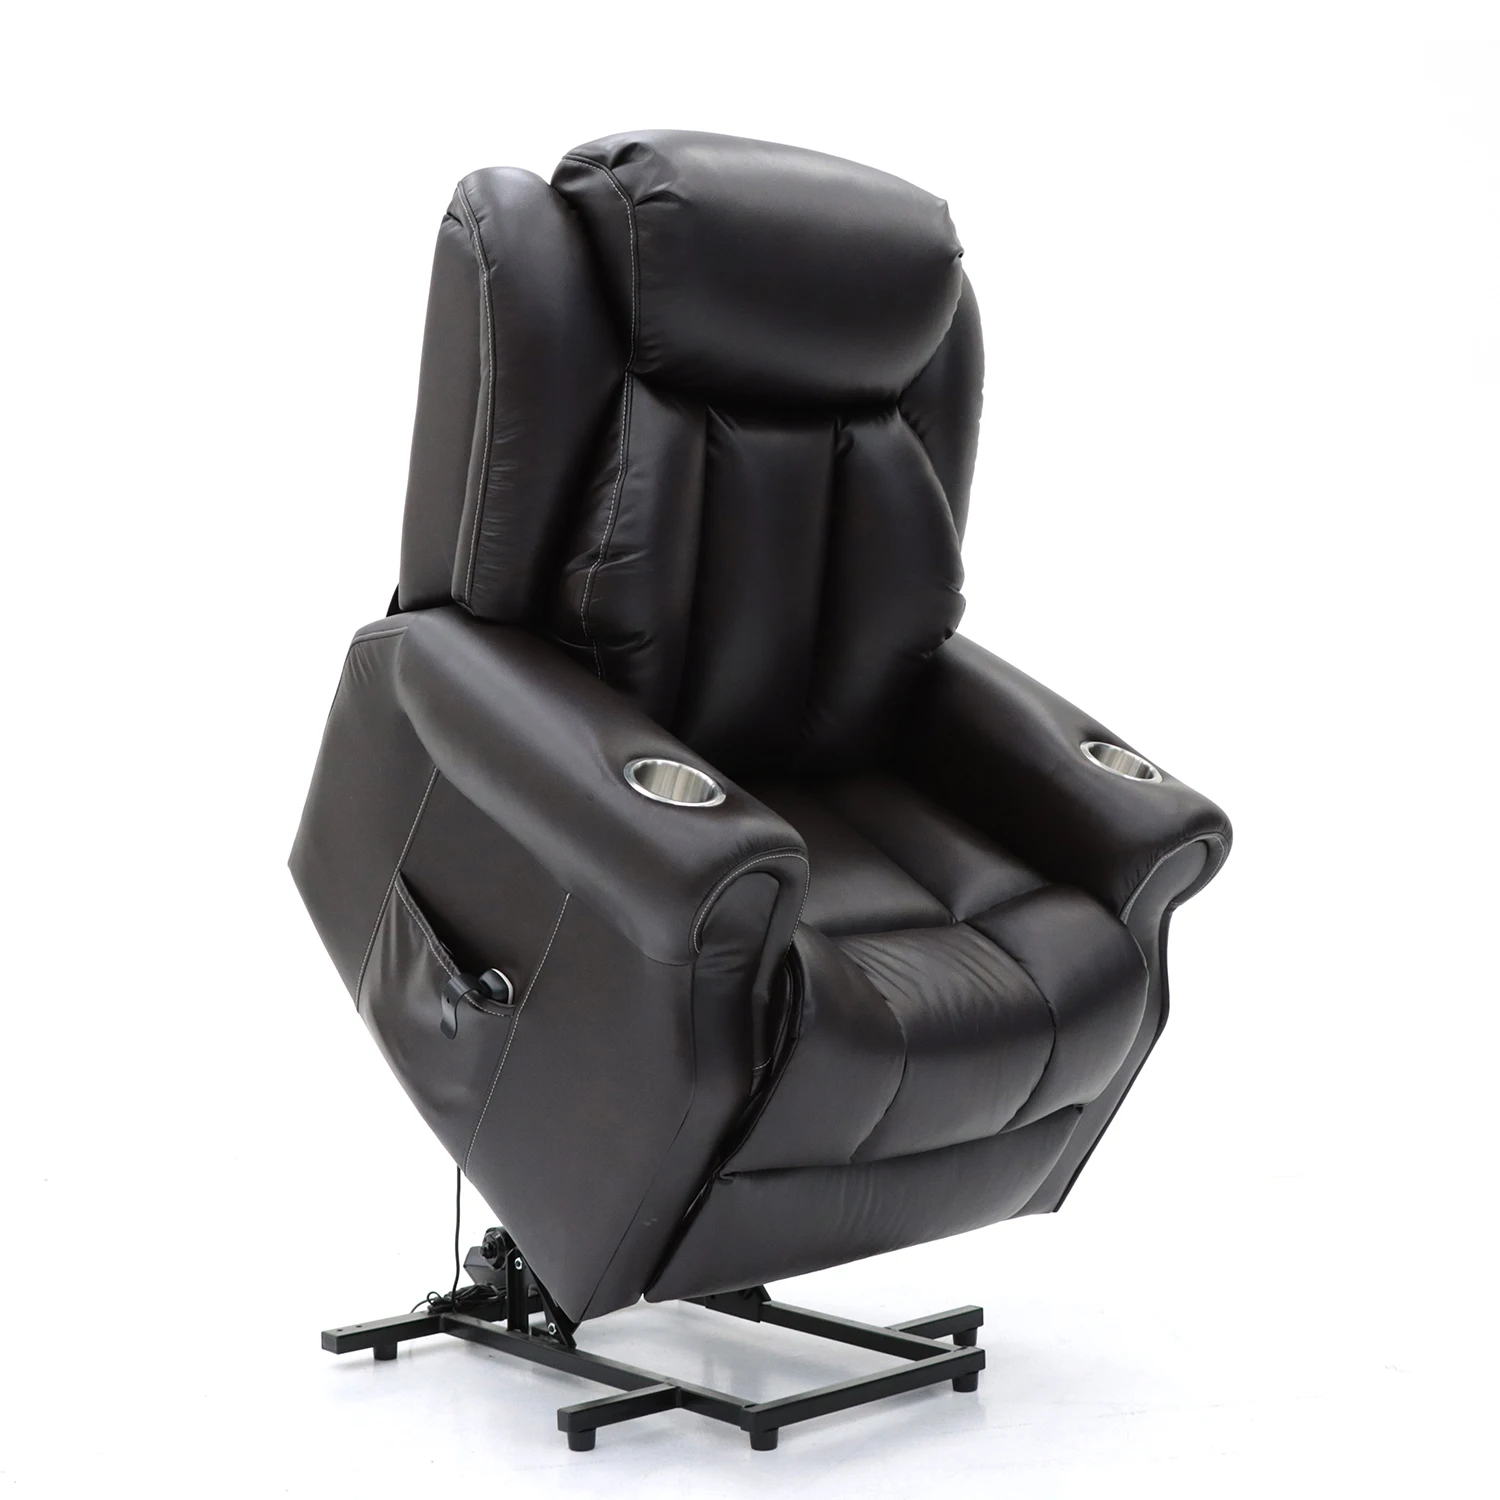 Geeksofa Air Leather Power Medical Lift Recliner Chair With Cup Holder ...